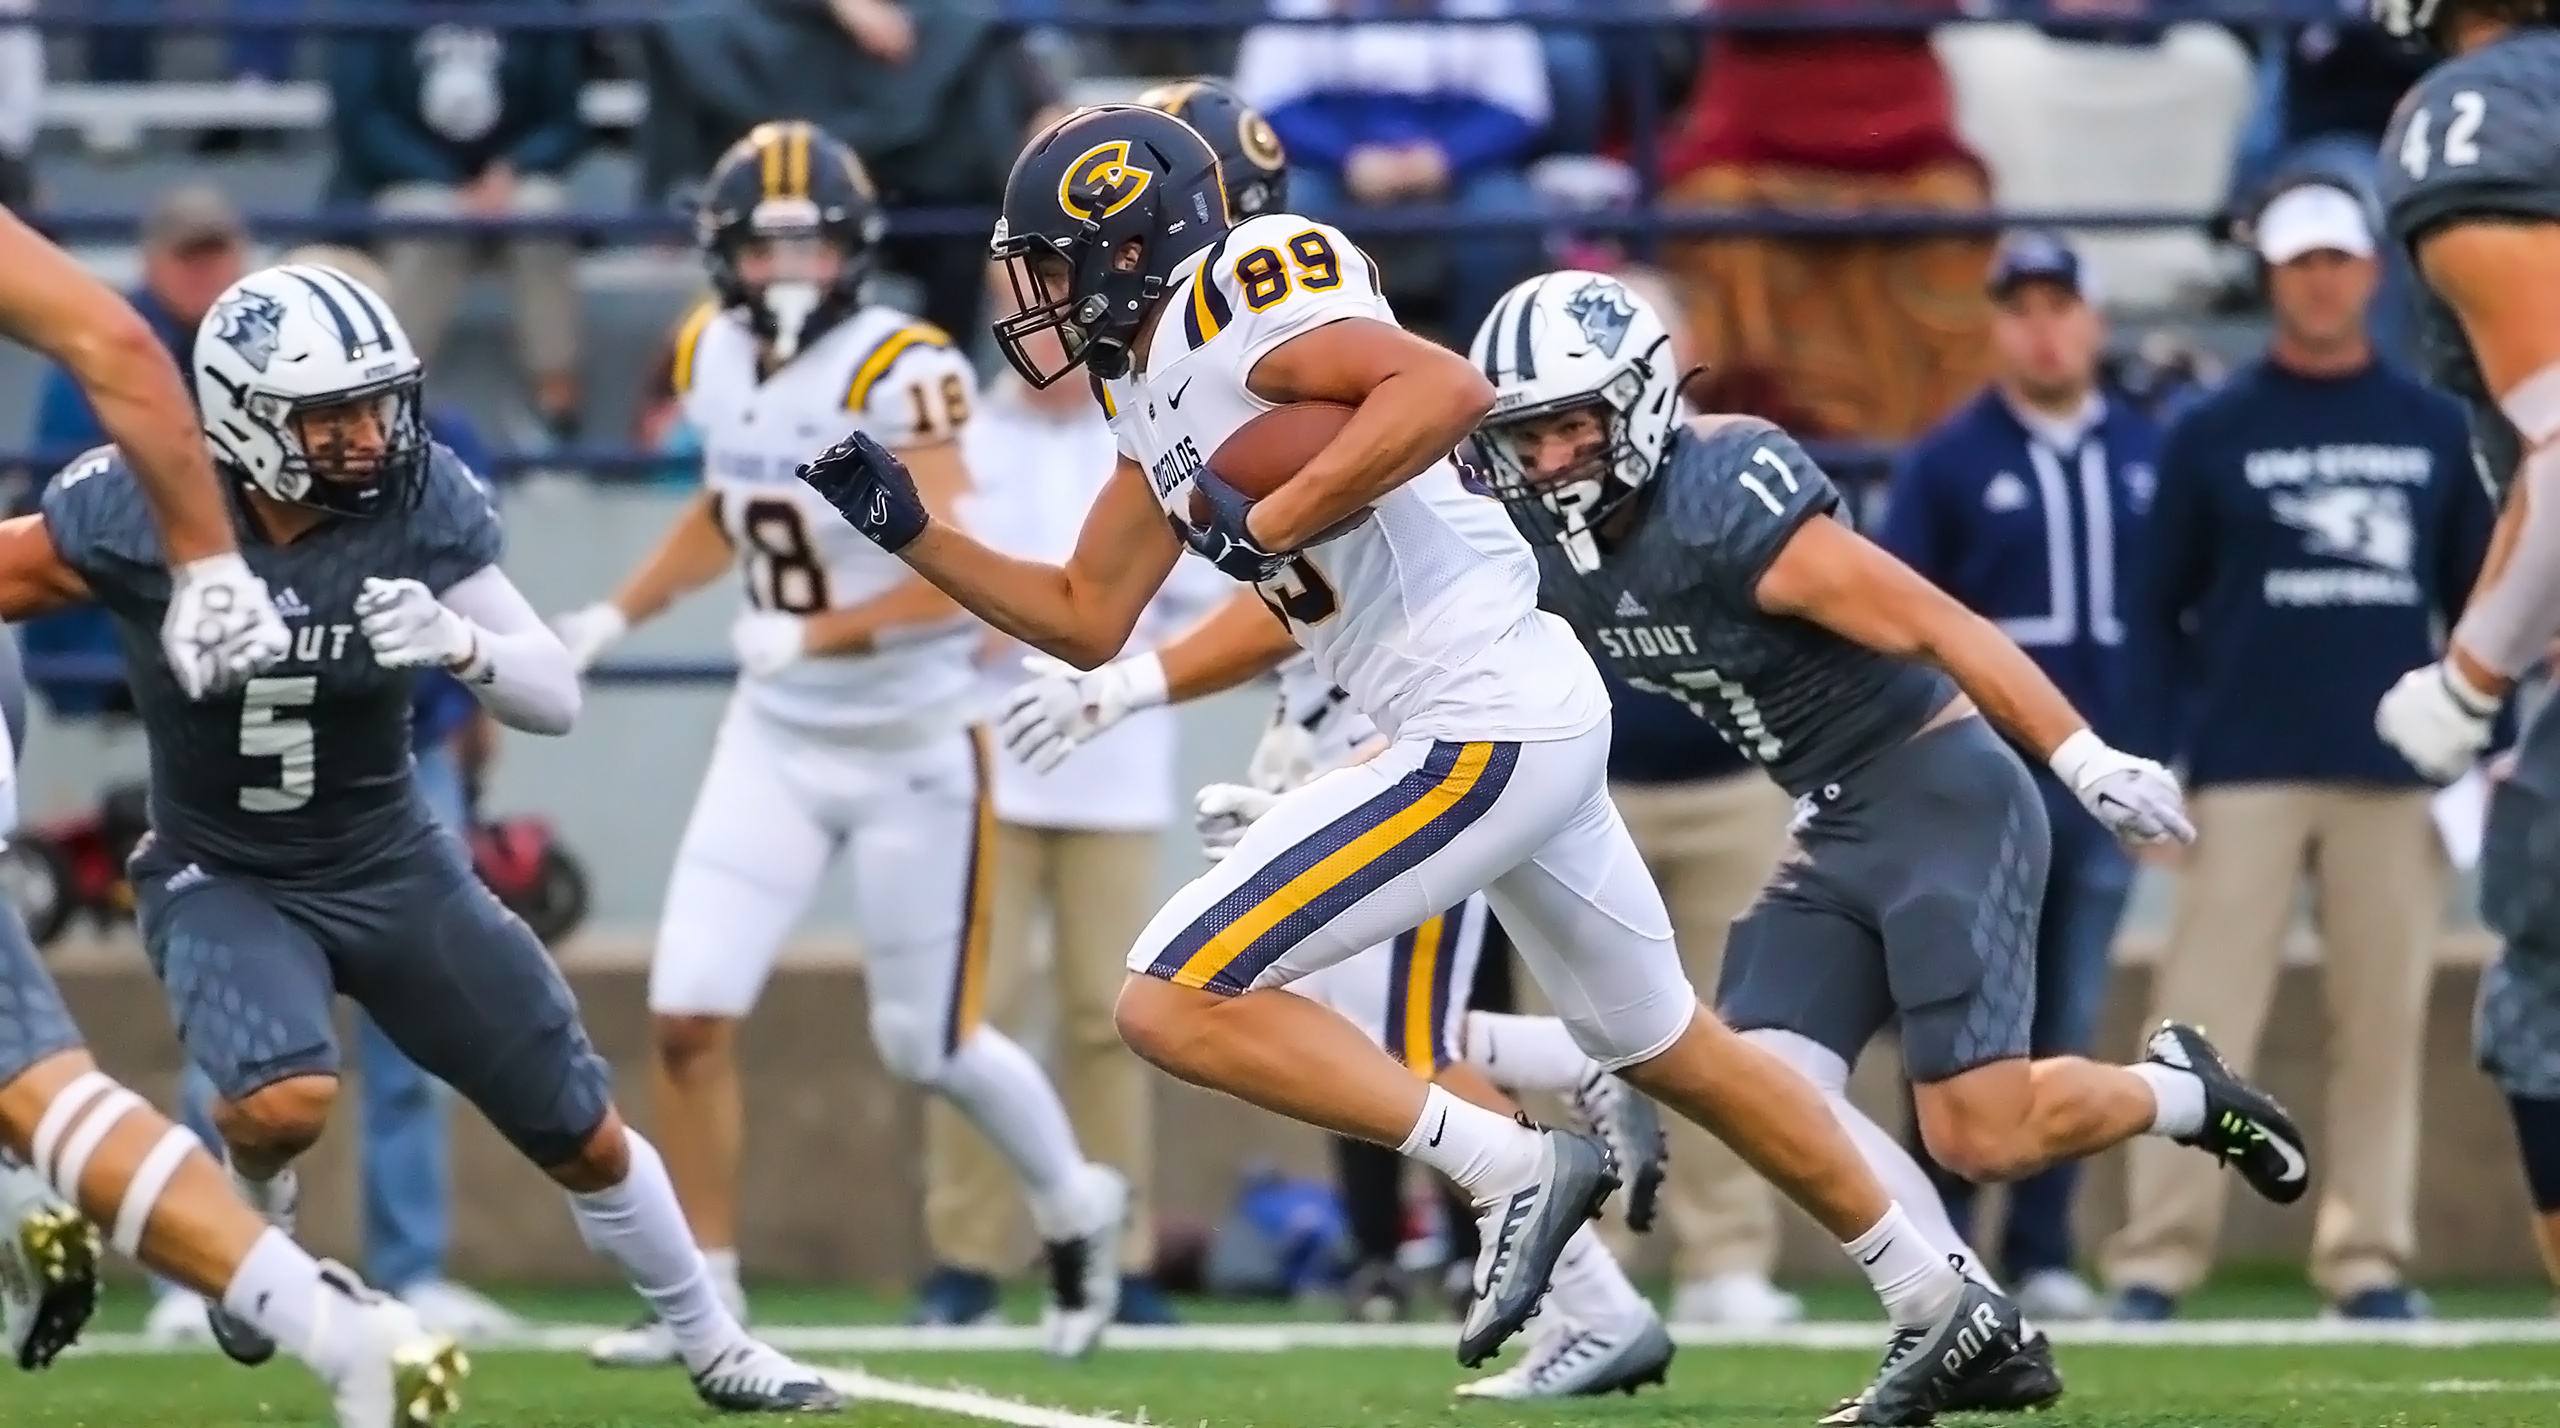 Blugolds Drop First WIAC Matchup on the Road